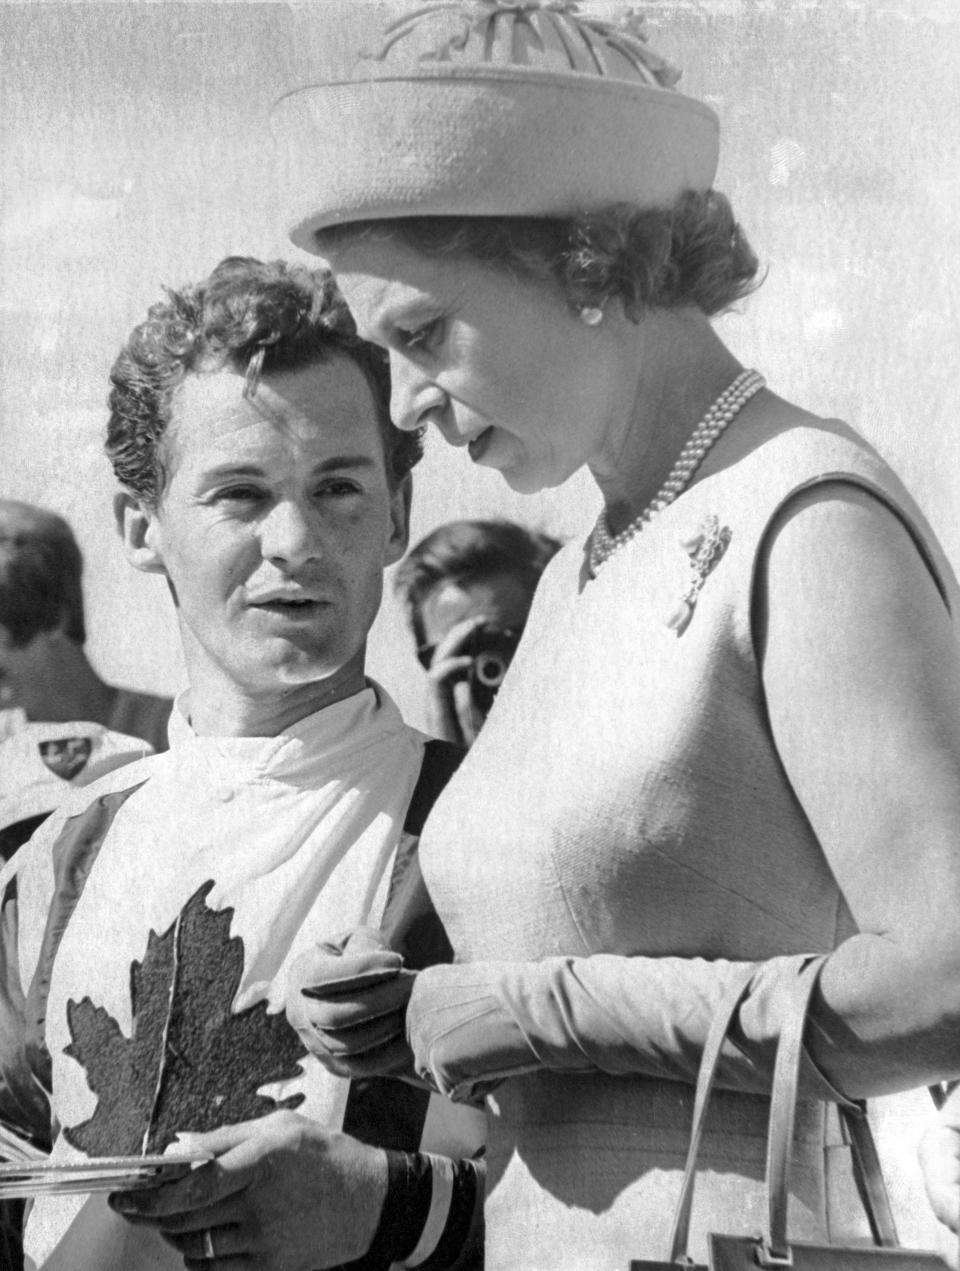 Queen Elizabeth II speaks with jockey Ron Turcotte after presenting Turcotte with the silver plate after riding Fanfreluche to victory in the Manitoba Derby at Assiniboia Downs in Winnipeg, Manitoba, July 15, 1970. “My dad and mother were both very impressed,” Turcotte said.(Canadian Press via AP)